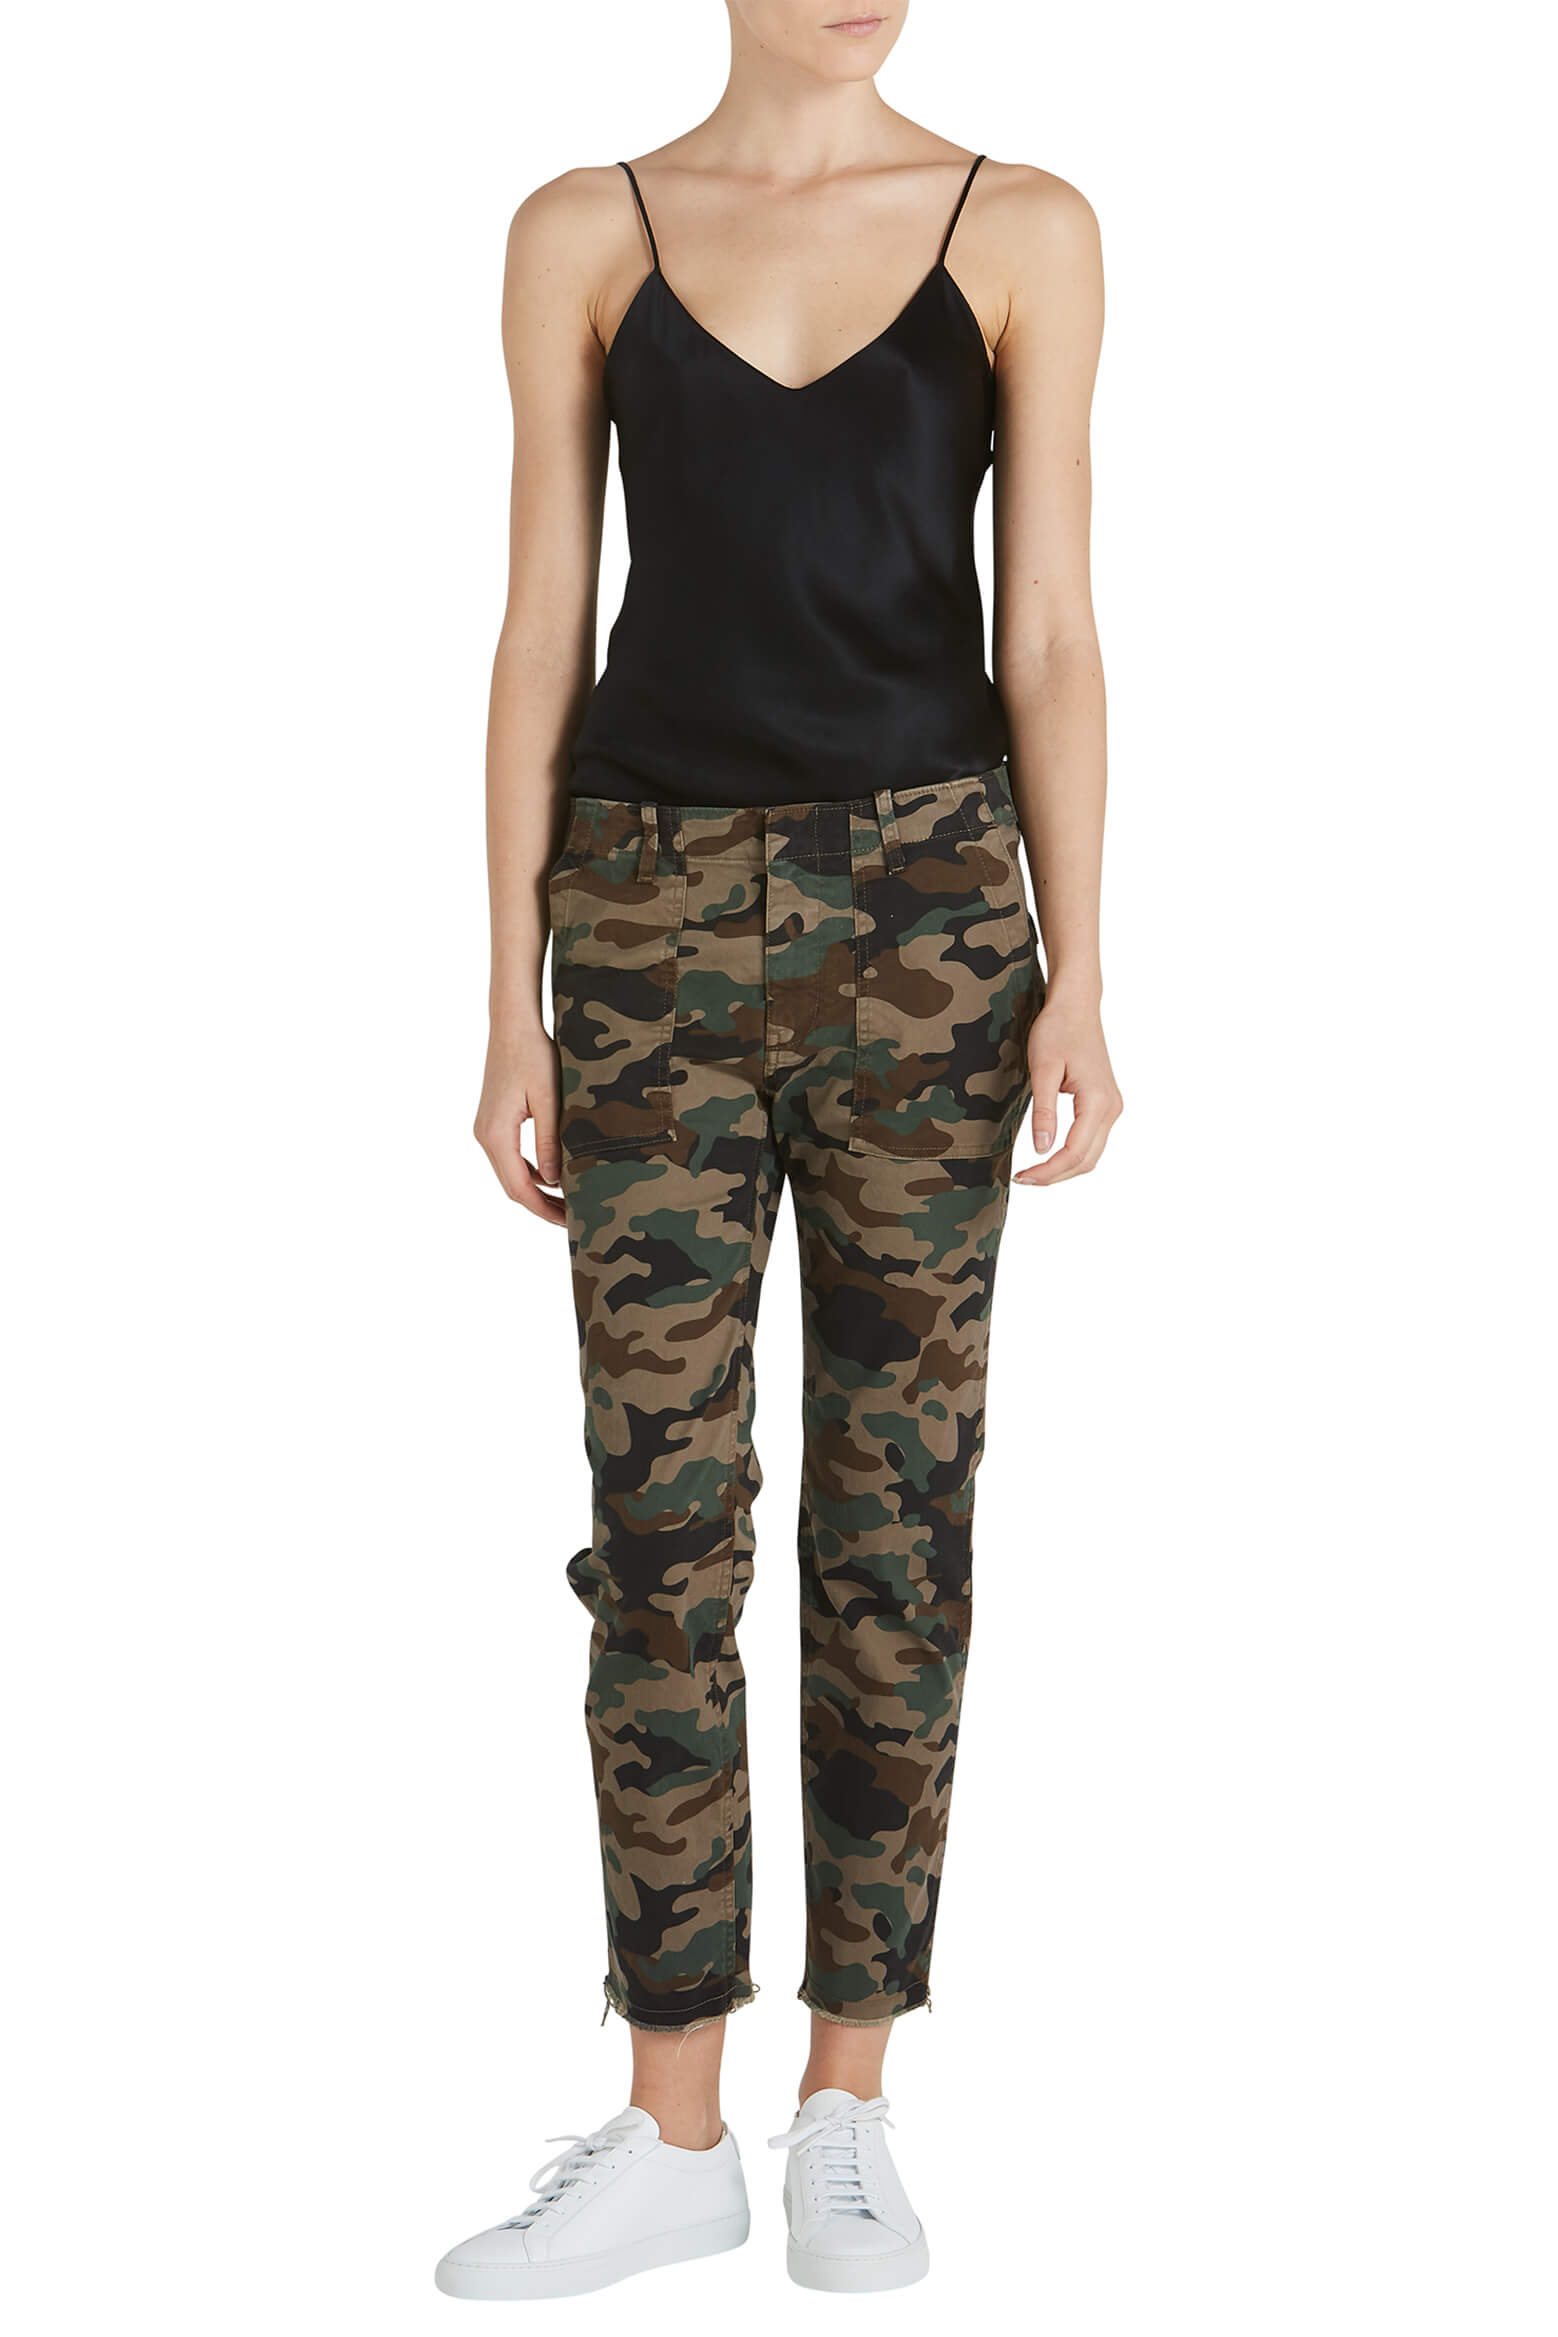 Nili Lotan Jenna Pant in Brown Camouflage from The New Trend Styled